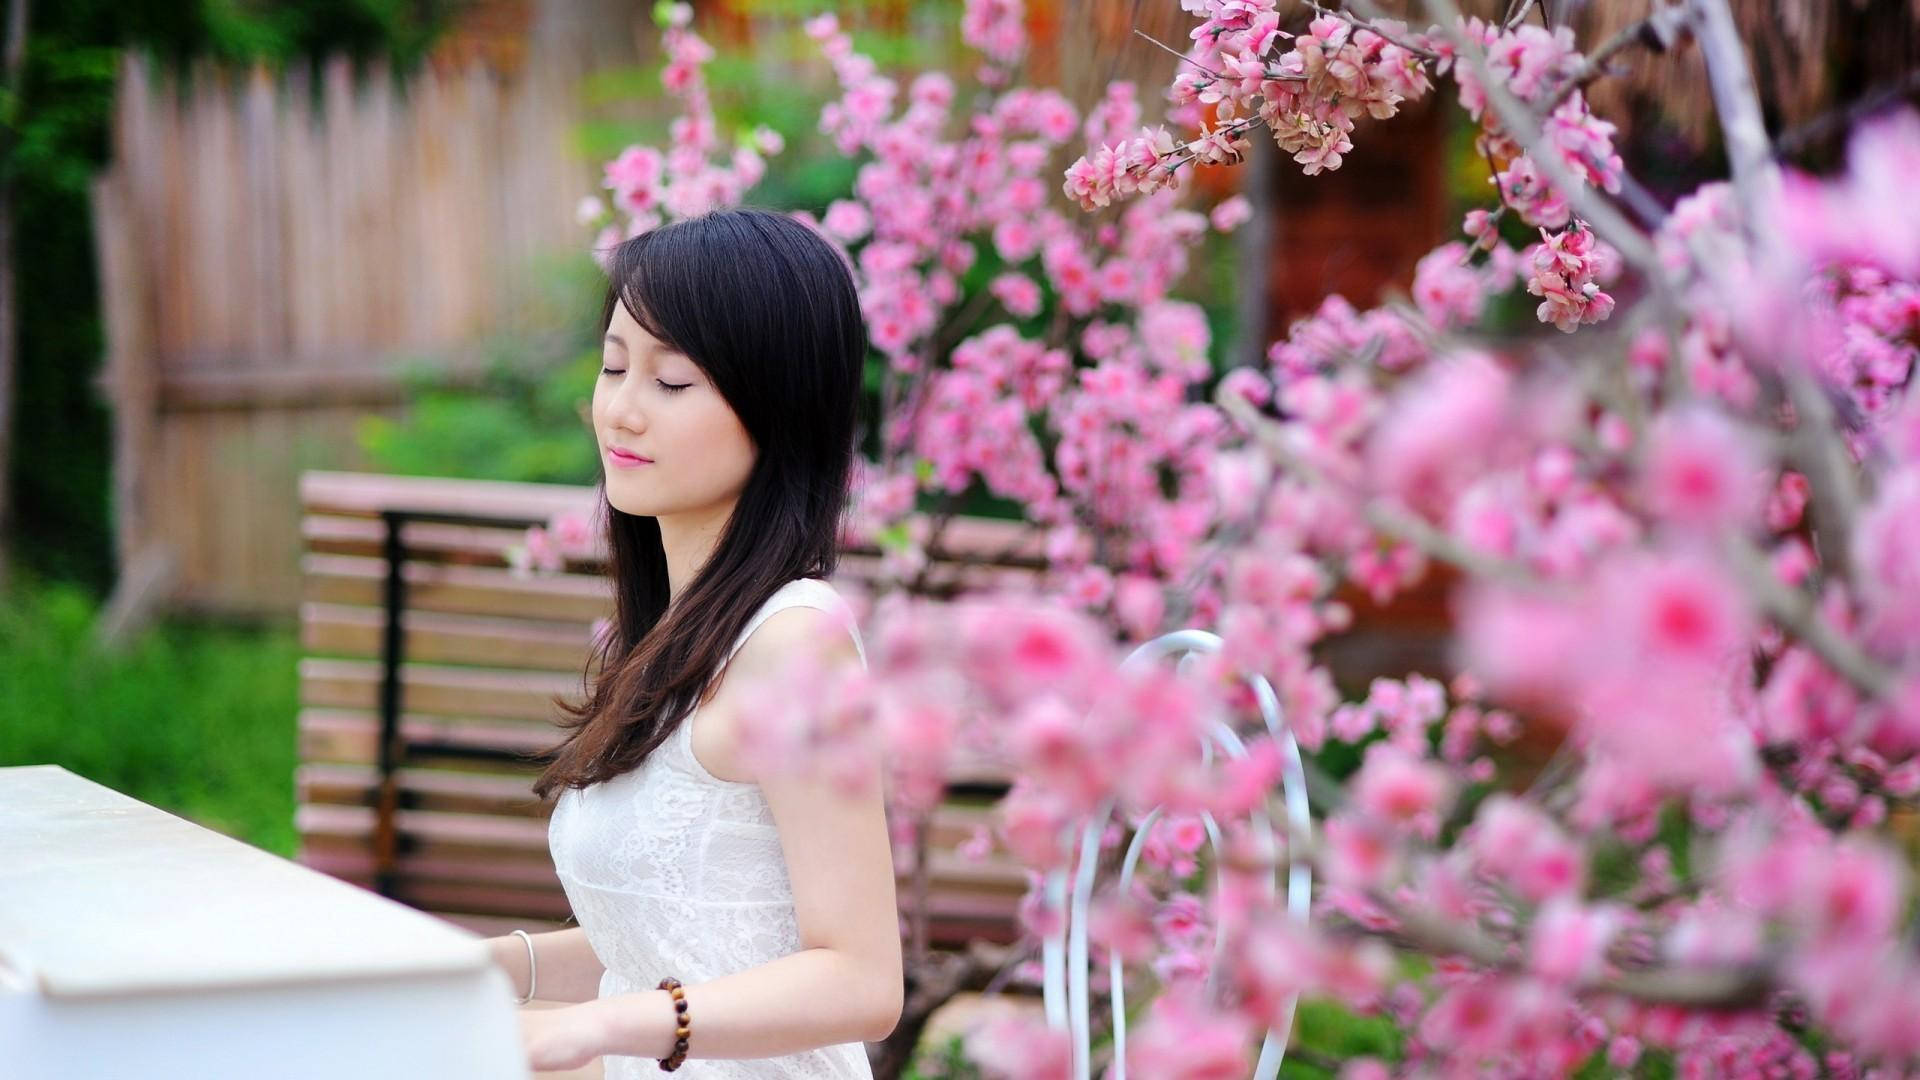 Japan Girl Playing Piano Pink Garden Flowers Background